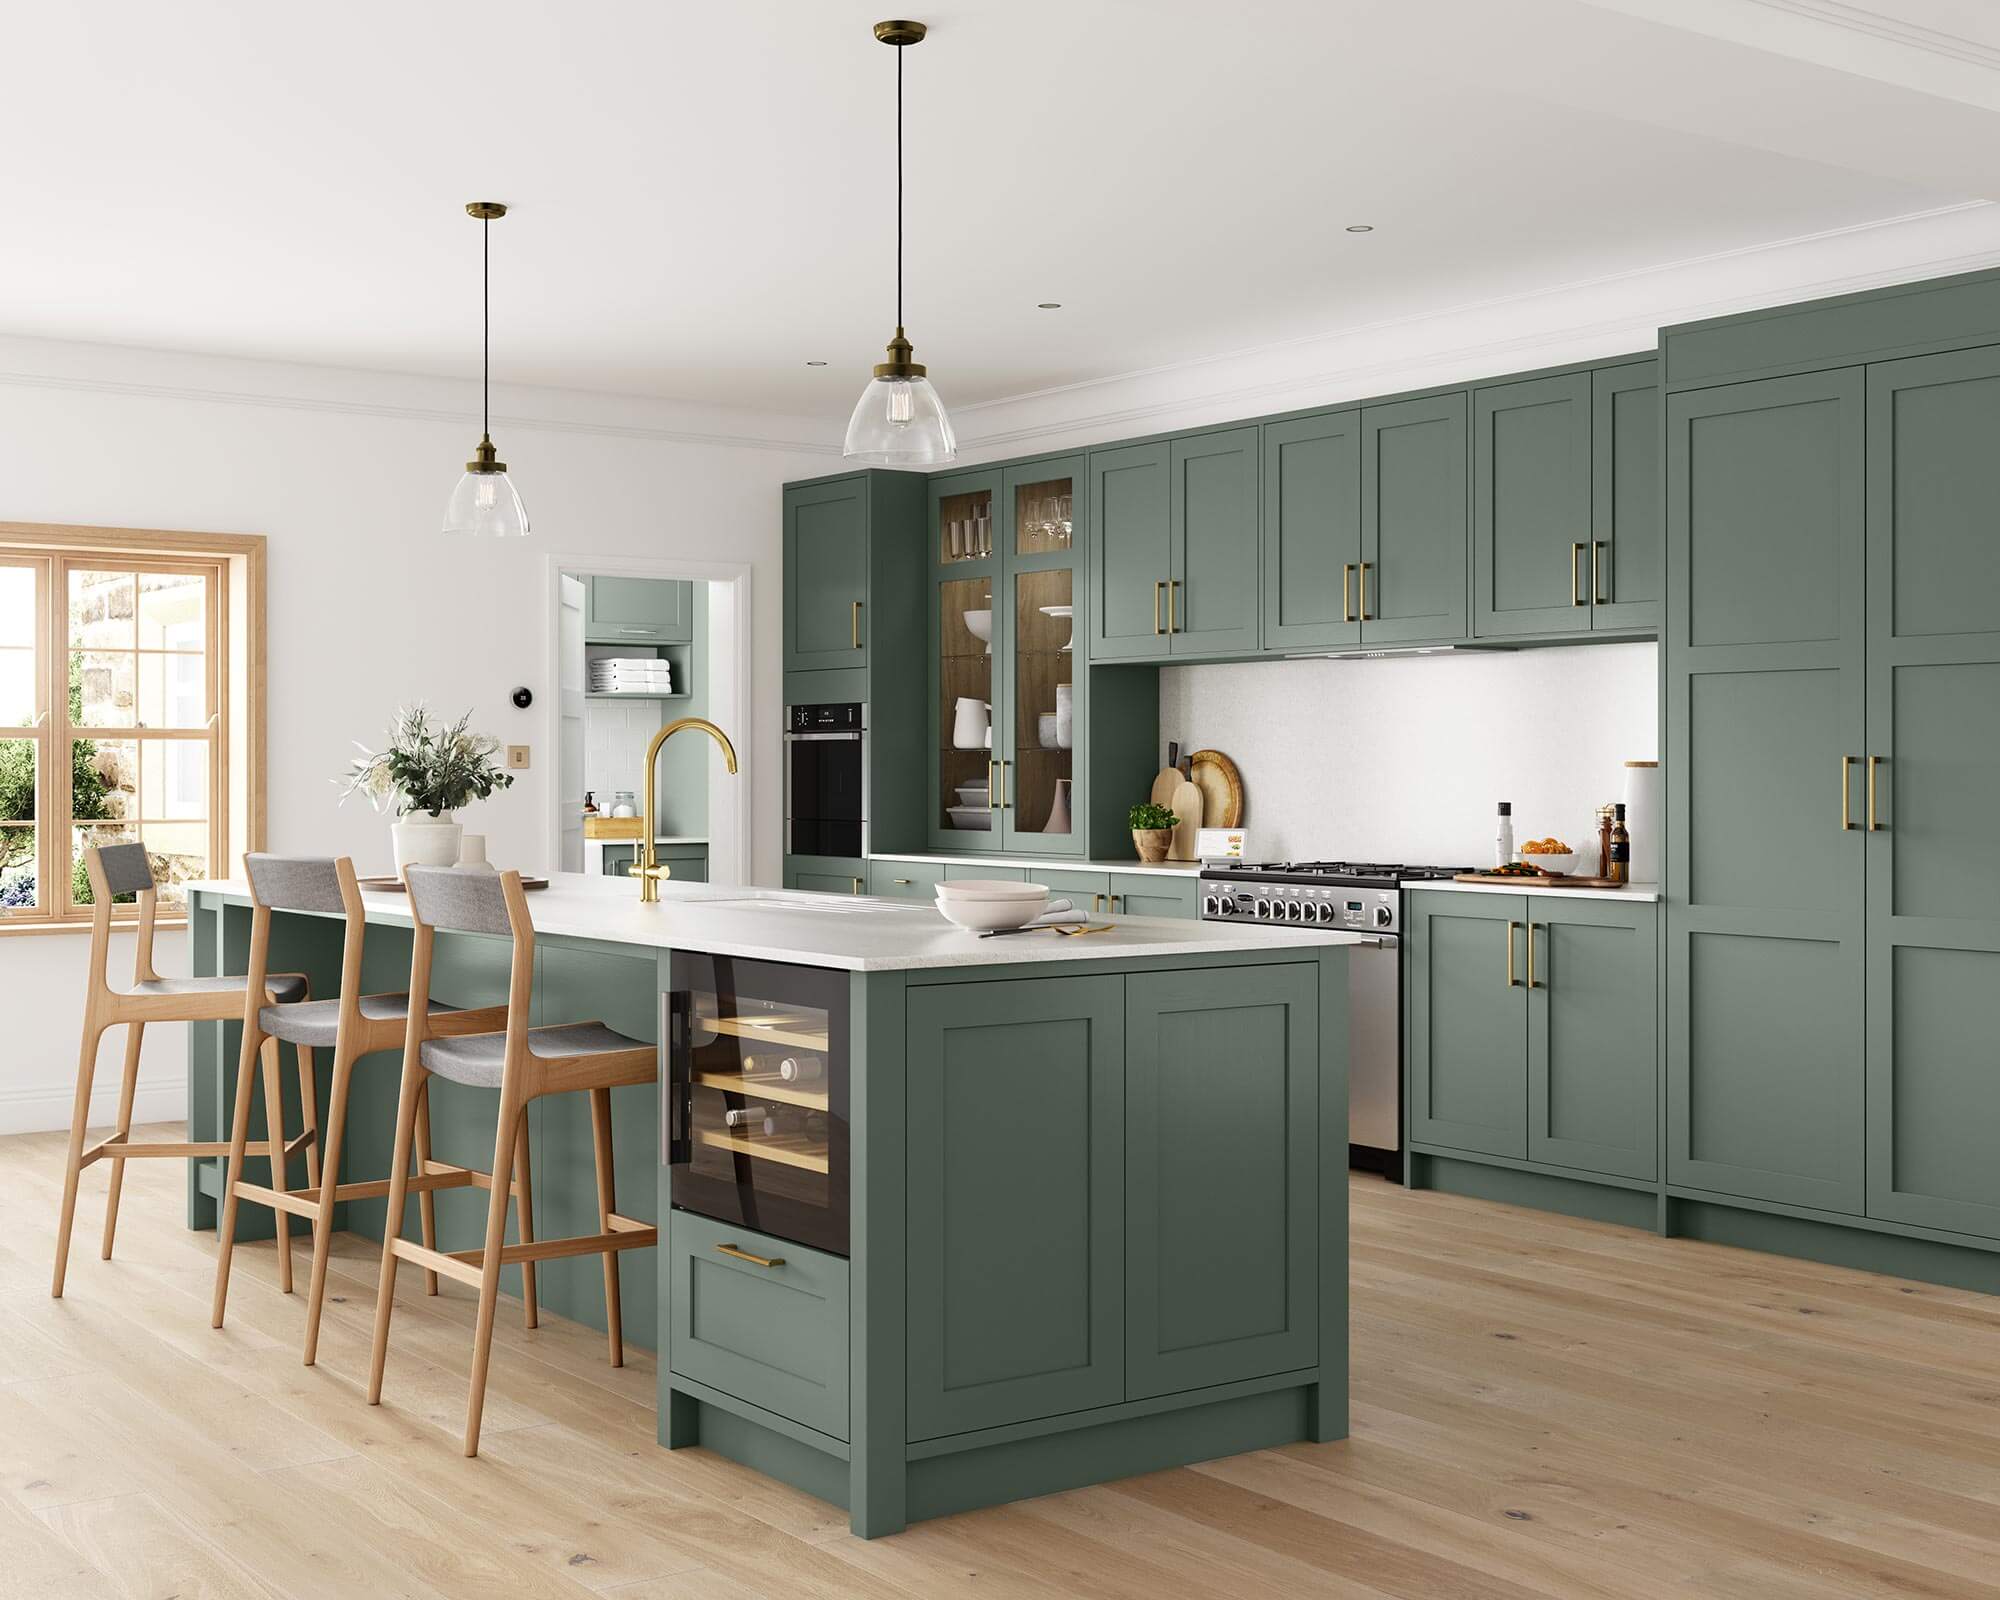 Marlow Sage Green  Benchmarx Kitchens & Joinery